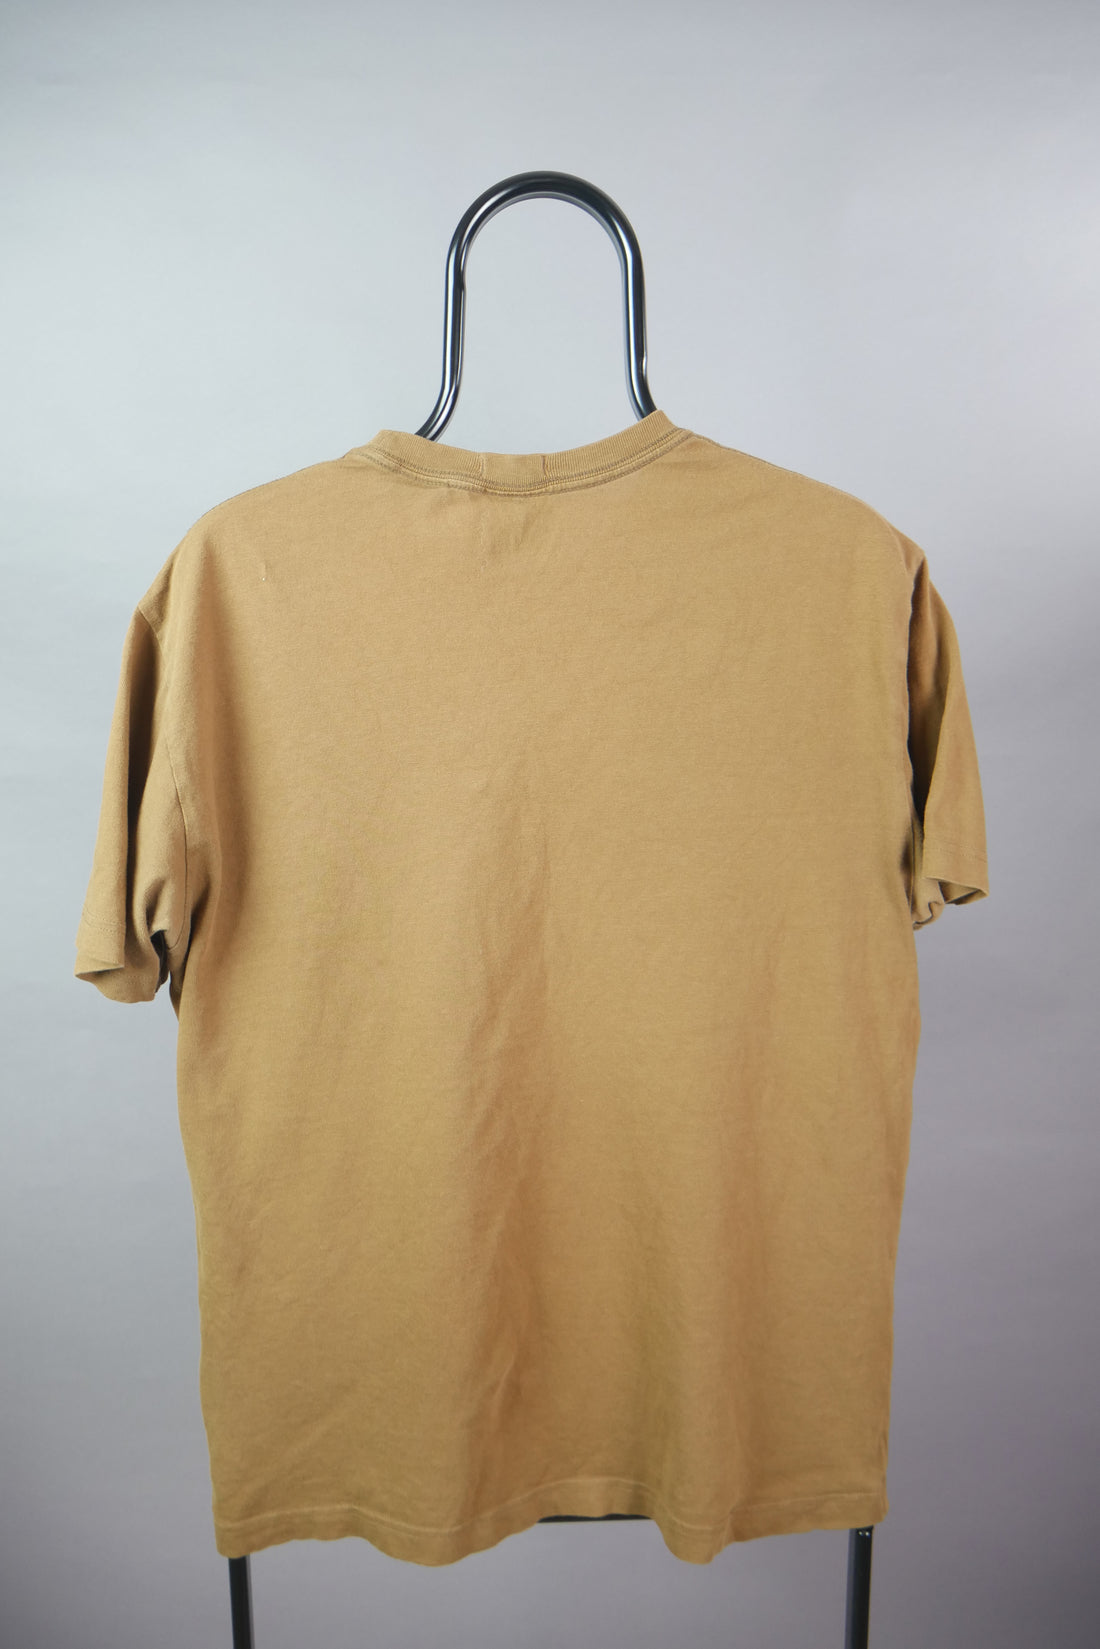 The Vintage Timberland T-Shirt (M)